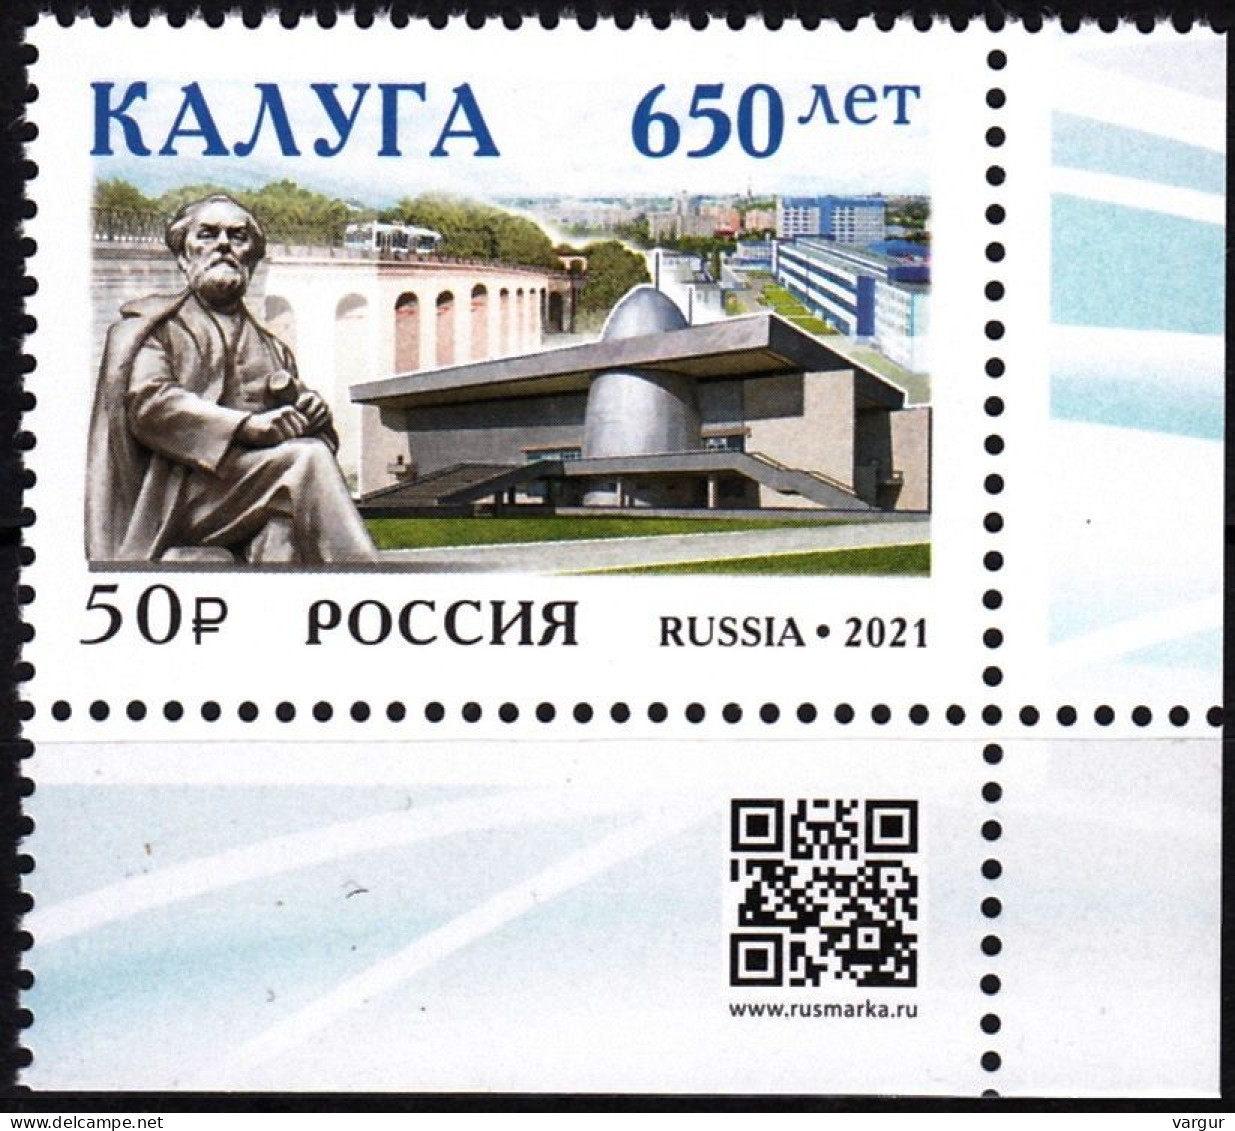 RUSSIA 2021-47 Architecture Space Monument. Kaluga Town - 650. QR CORNER, MNH - Russia & USSR